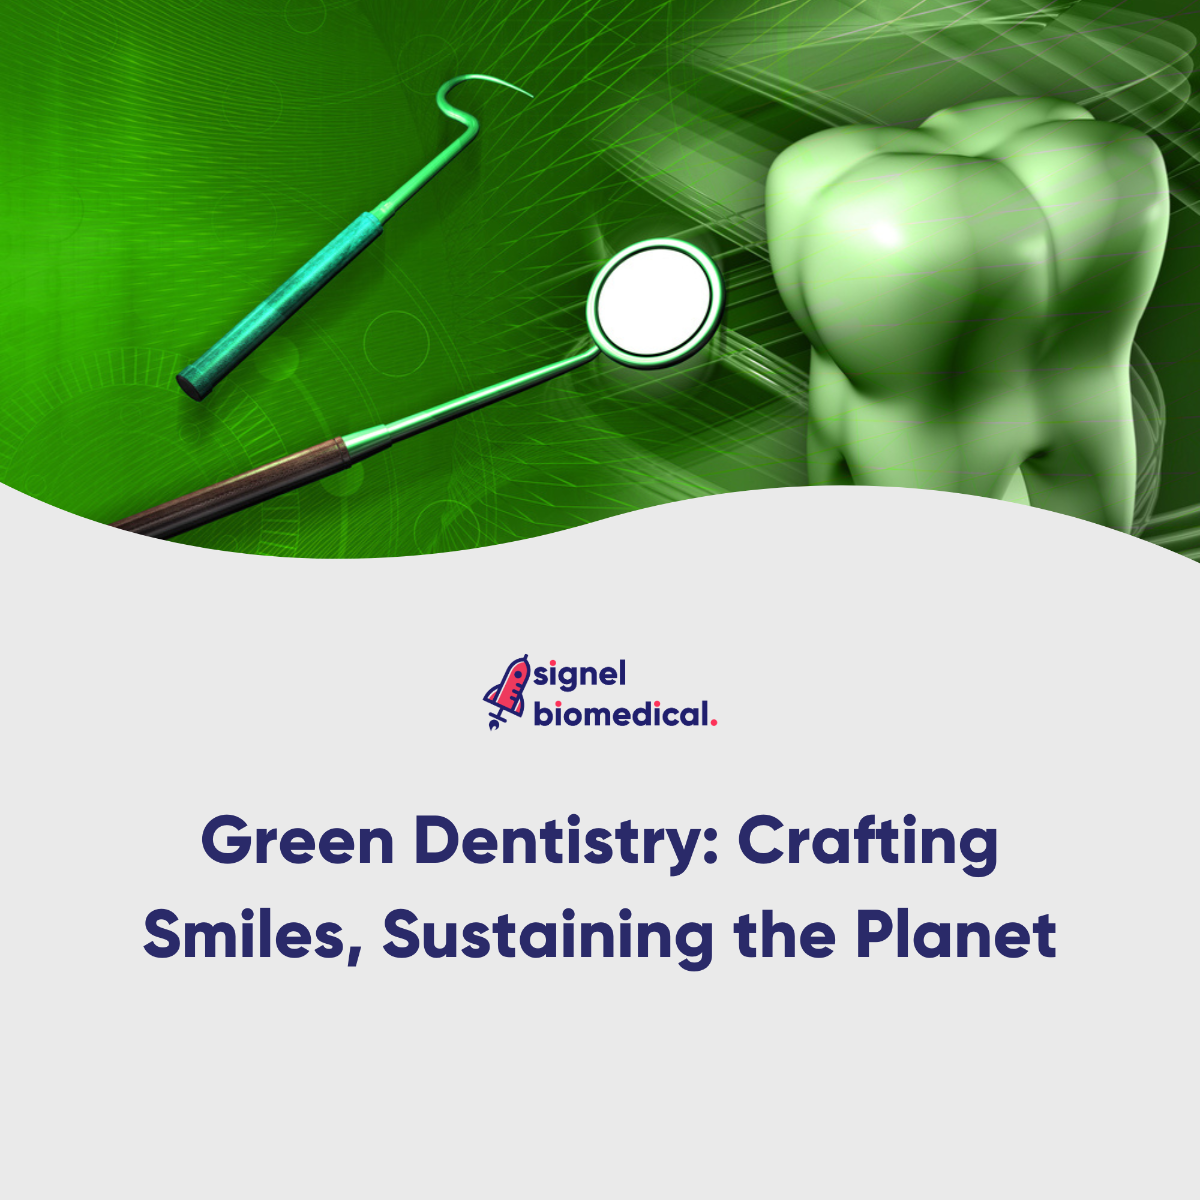 Gaining insights to Green Dentistry